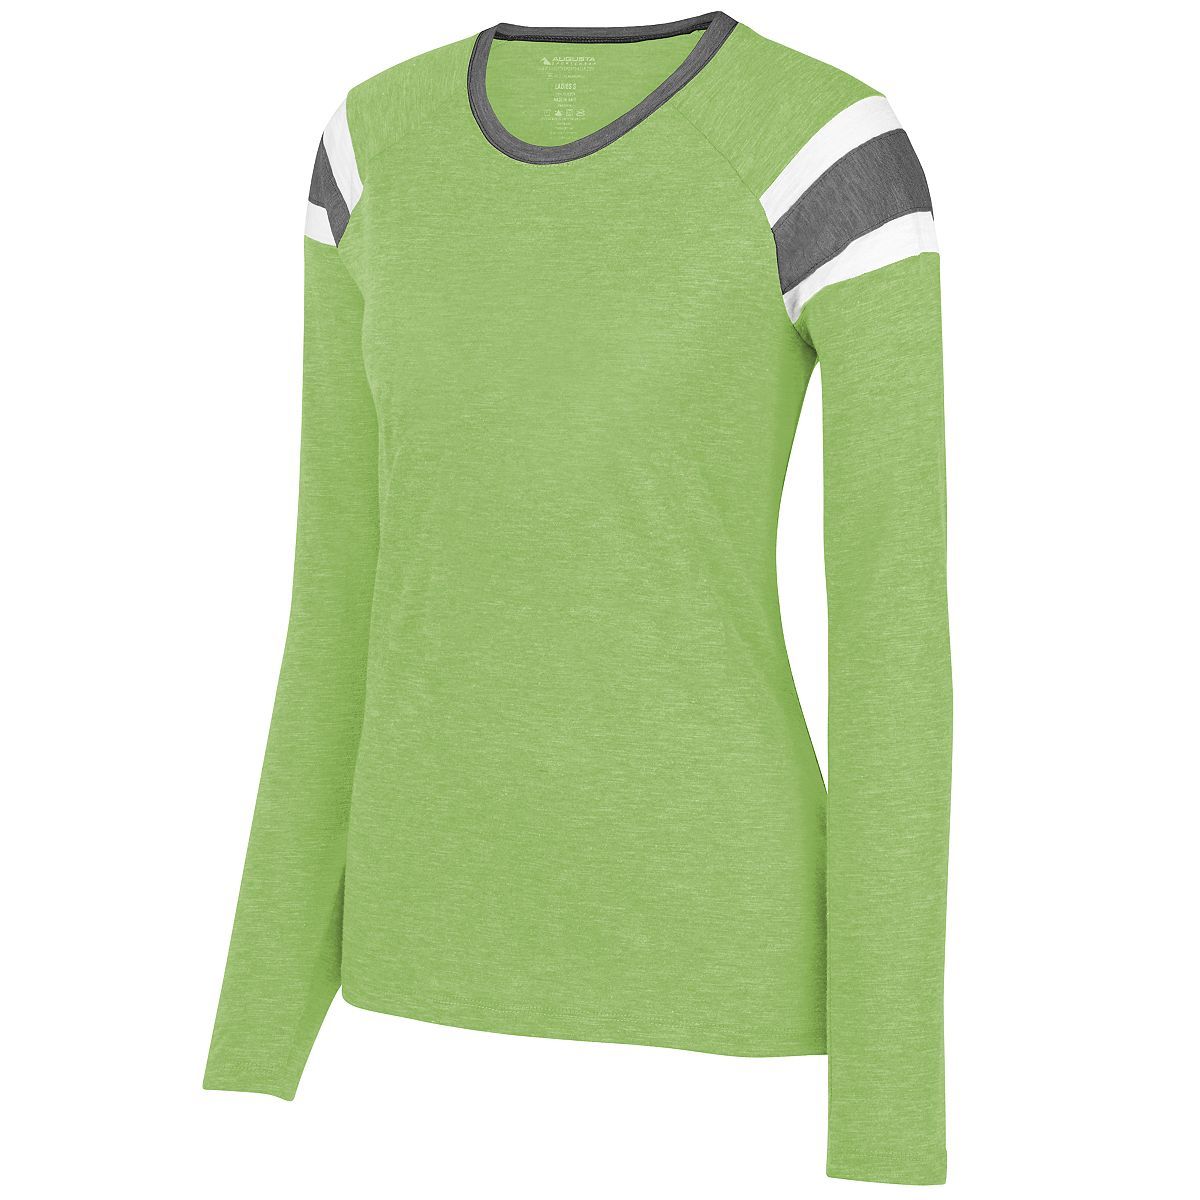 Augusta Sportswear Ladies Long Sleeve Fanatic Tee in Lime/Slate/White  -Part of the Ladies, Ladies-Tee-Shirt, T-Shirts, Augusta-Products, Shirts product lines at KanaleyCreations.com